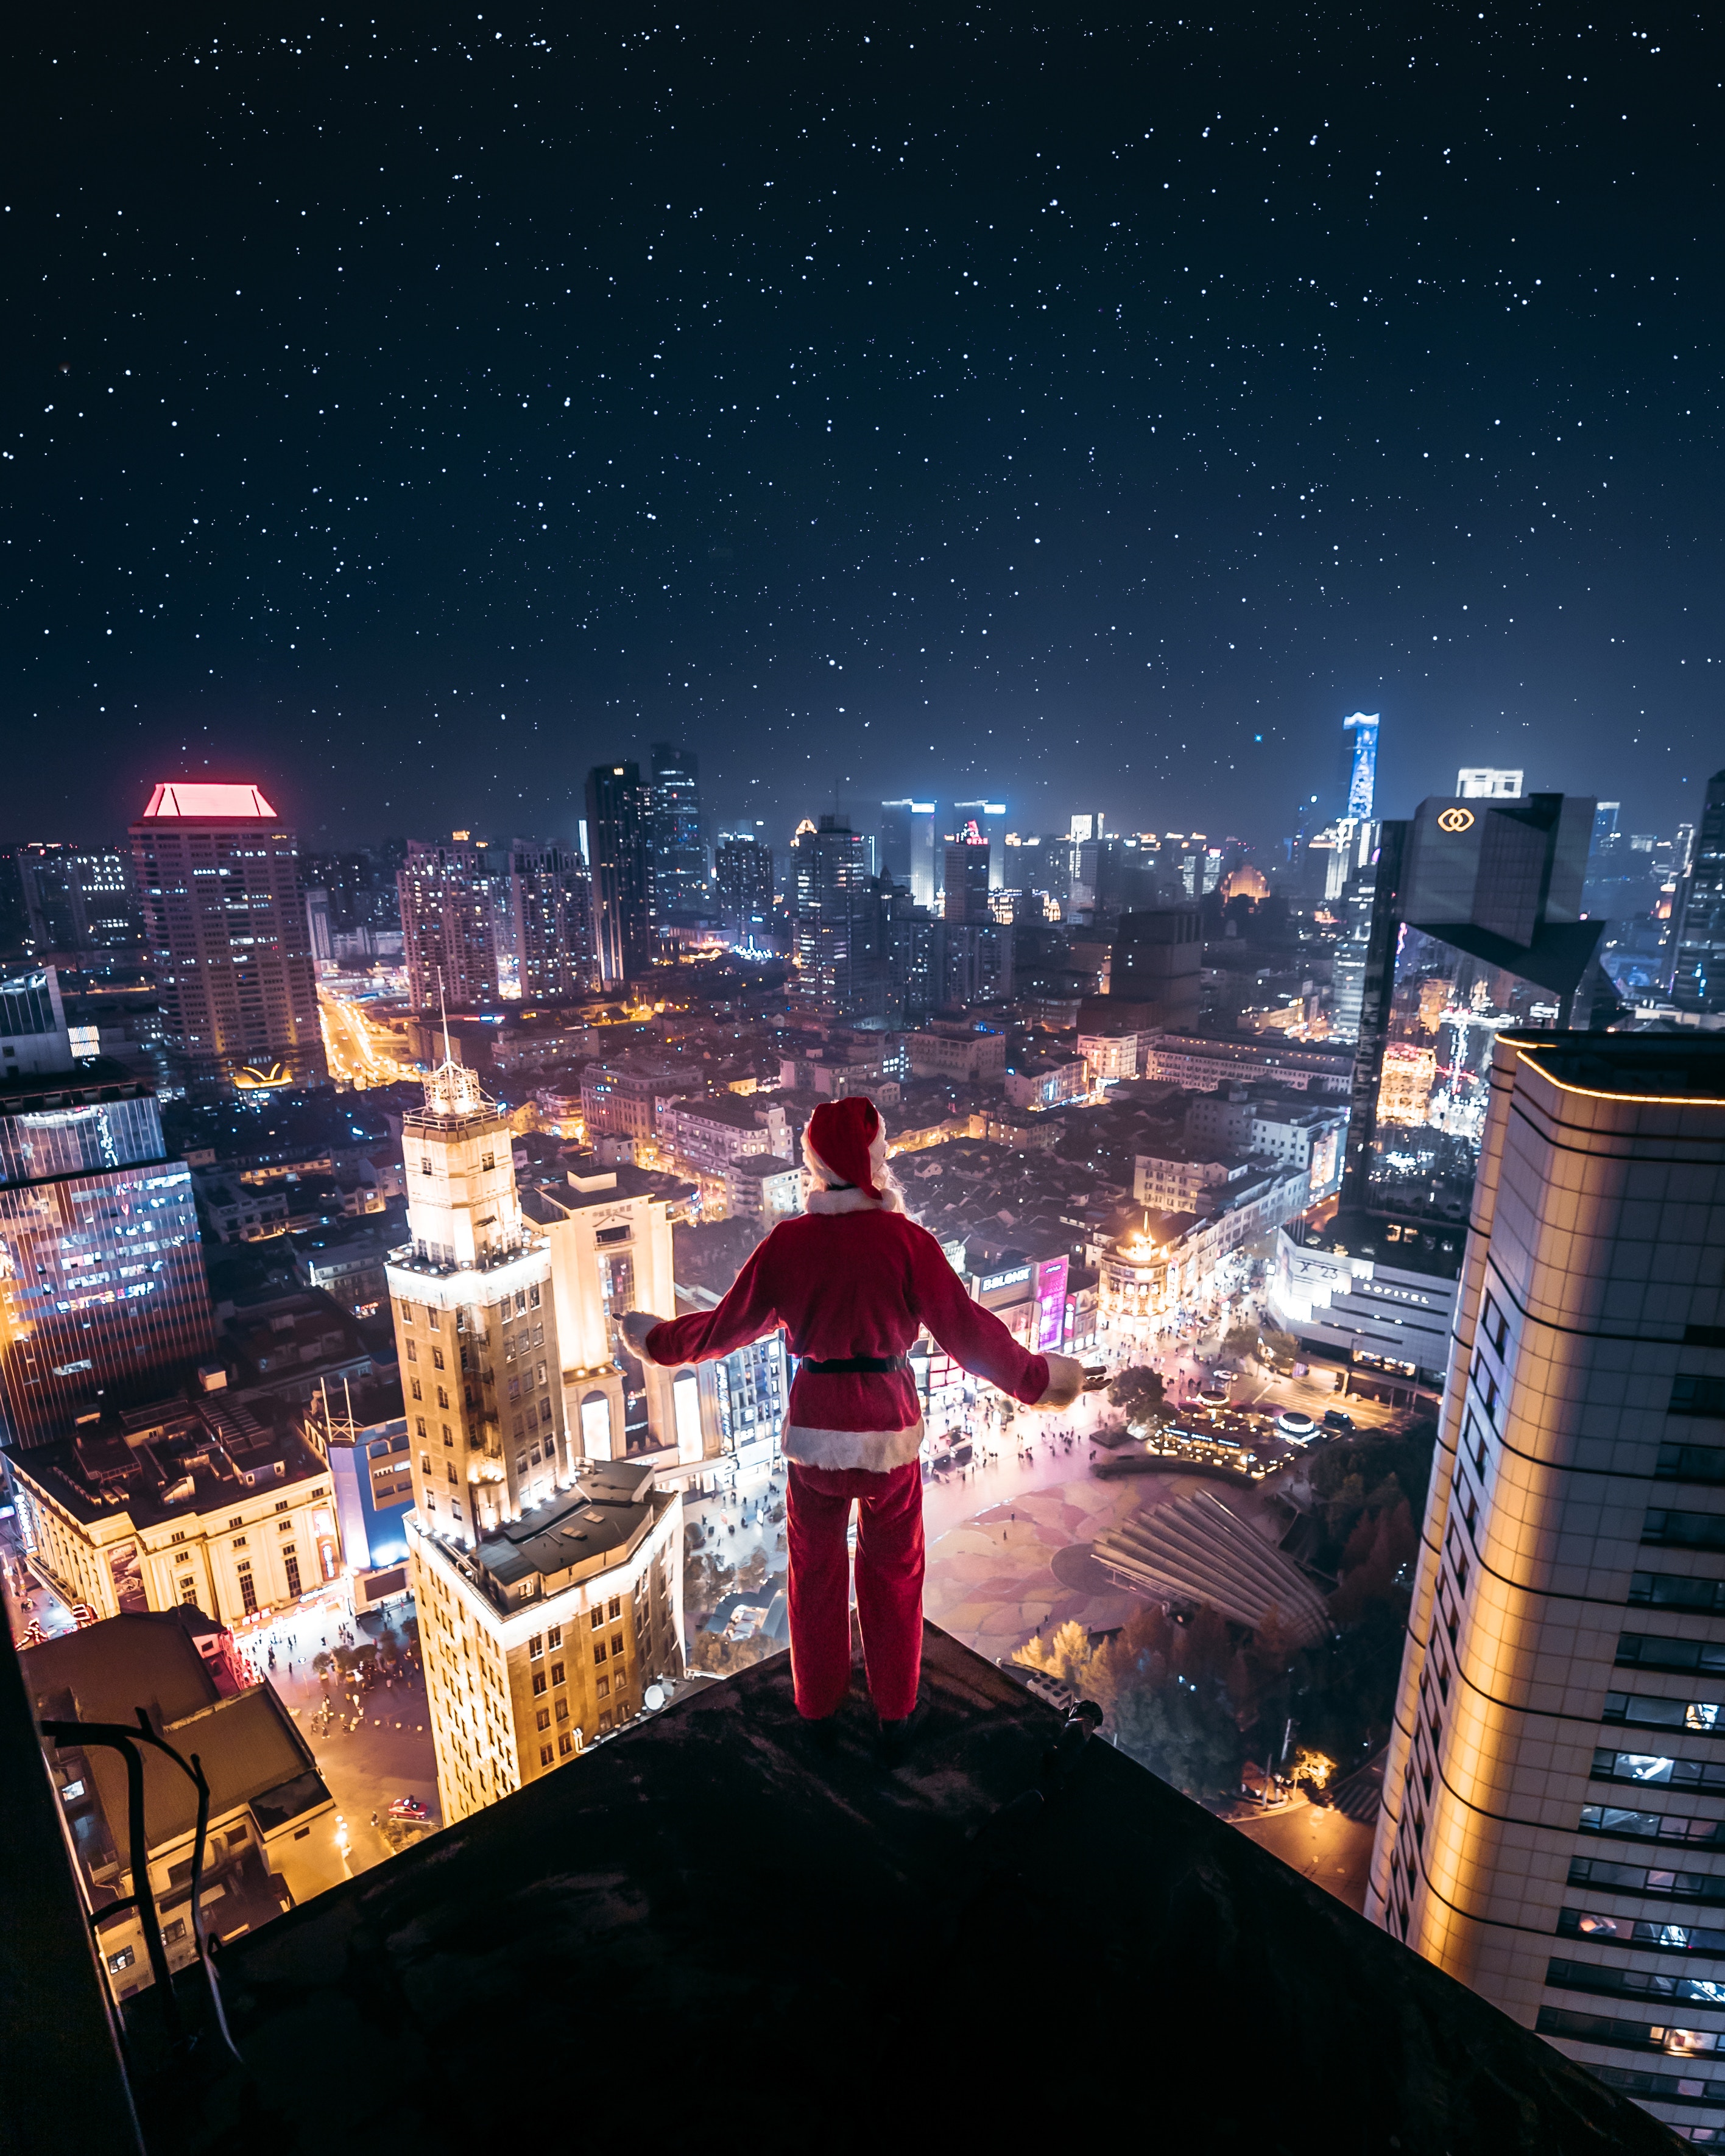 night city, santa claus, loneliness, holidays, view from above, roof